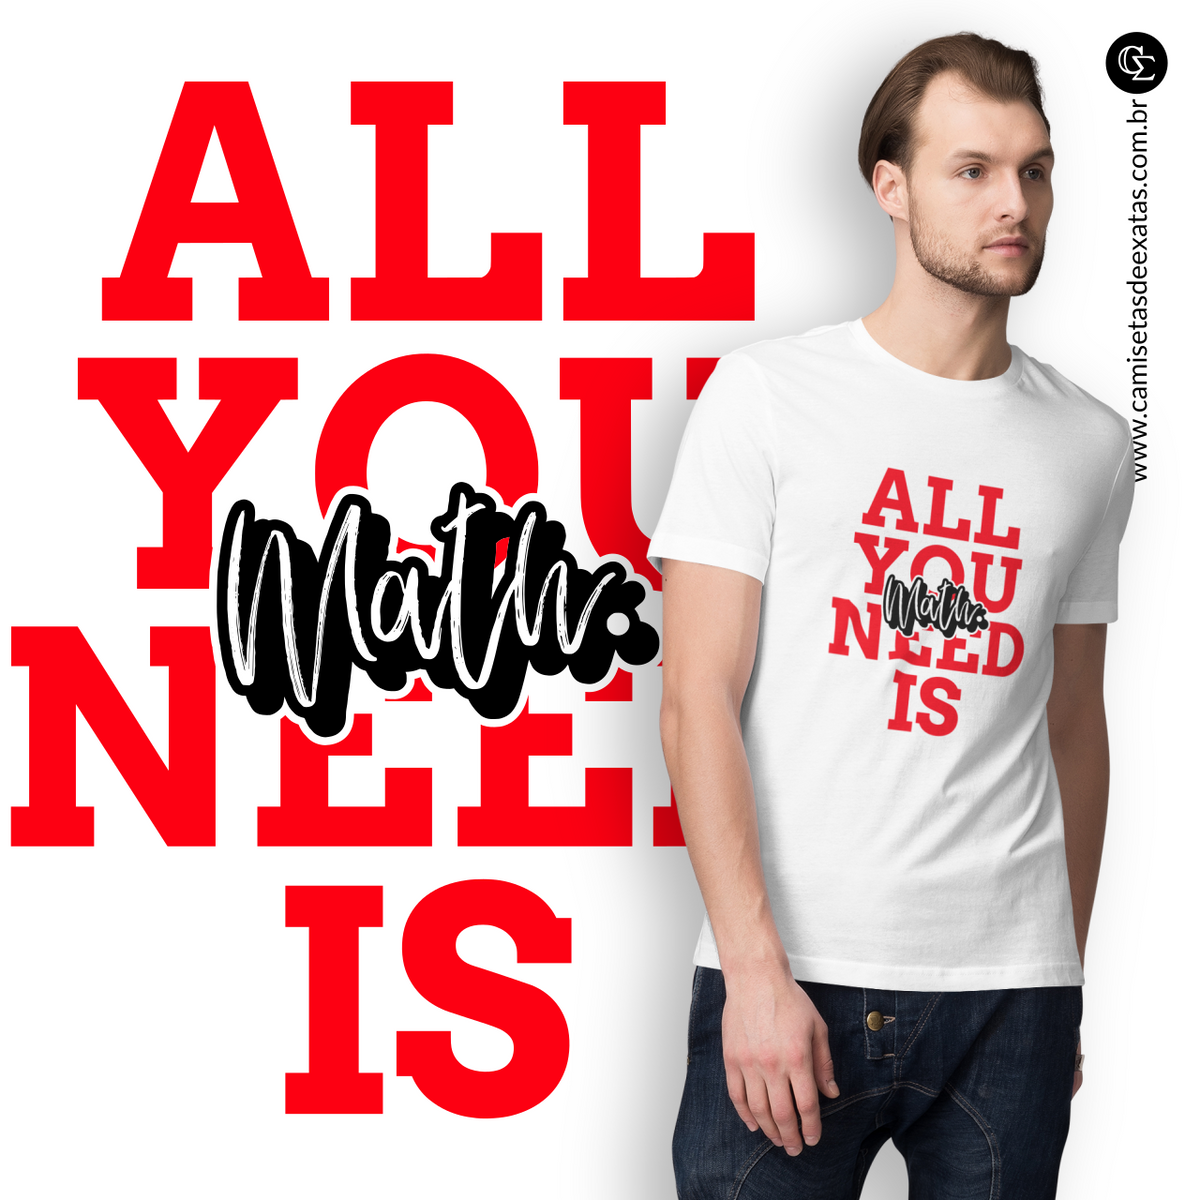 Nome do produto: ALL YOU NEED IS MATH [1]